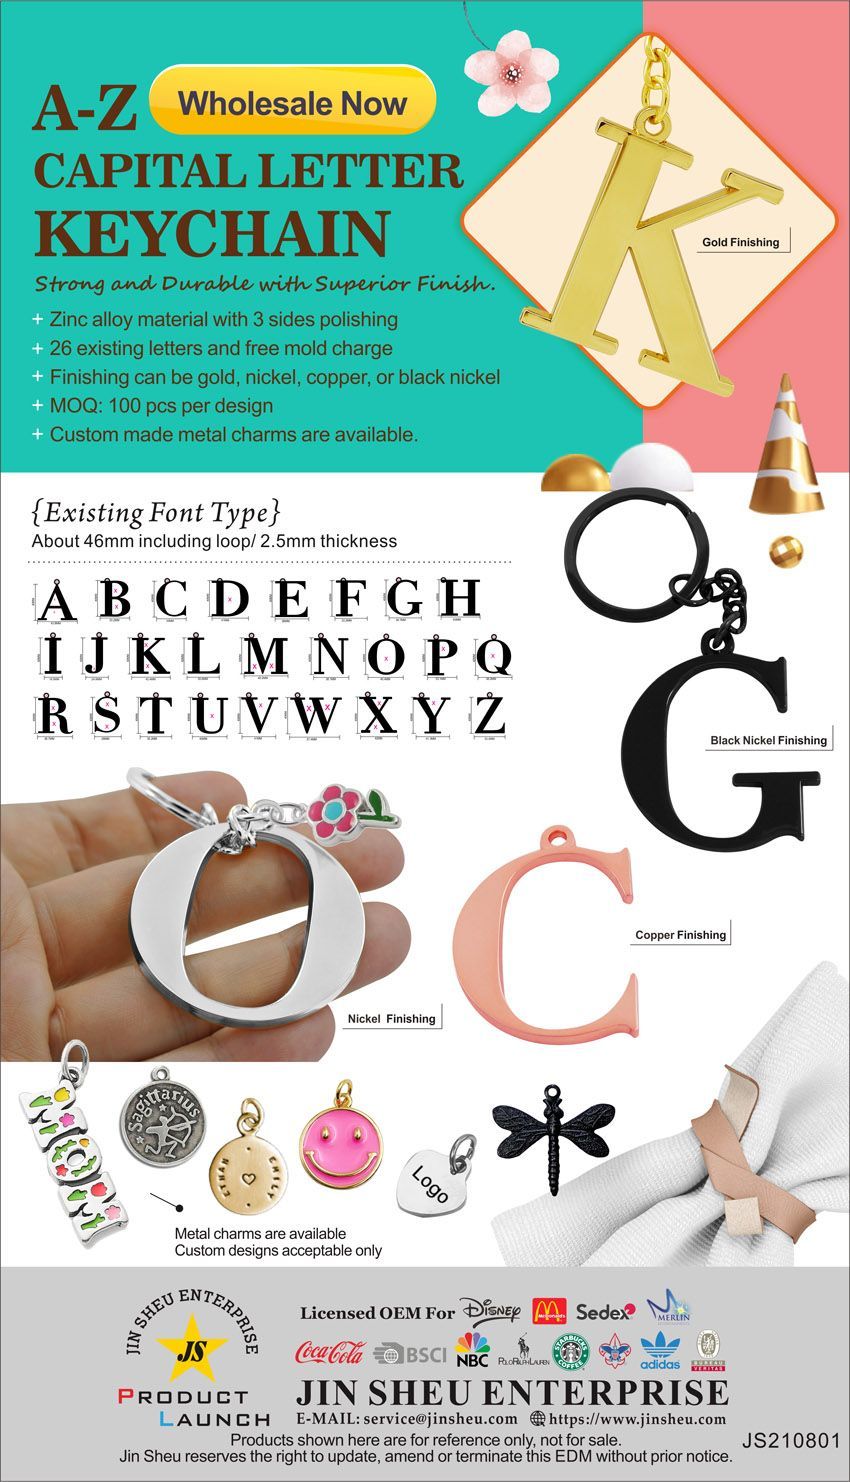 A-Z Capital Letter Keychain